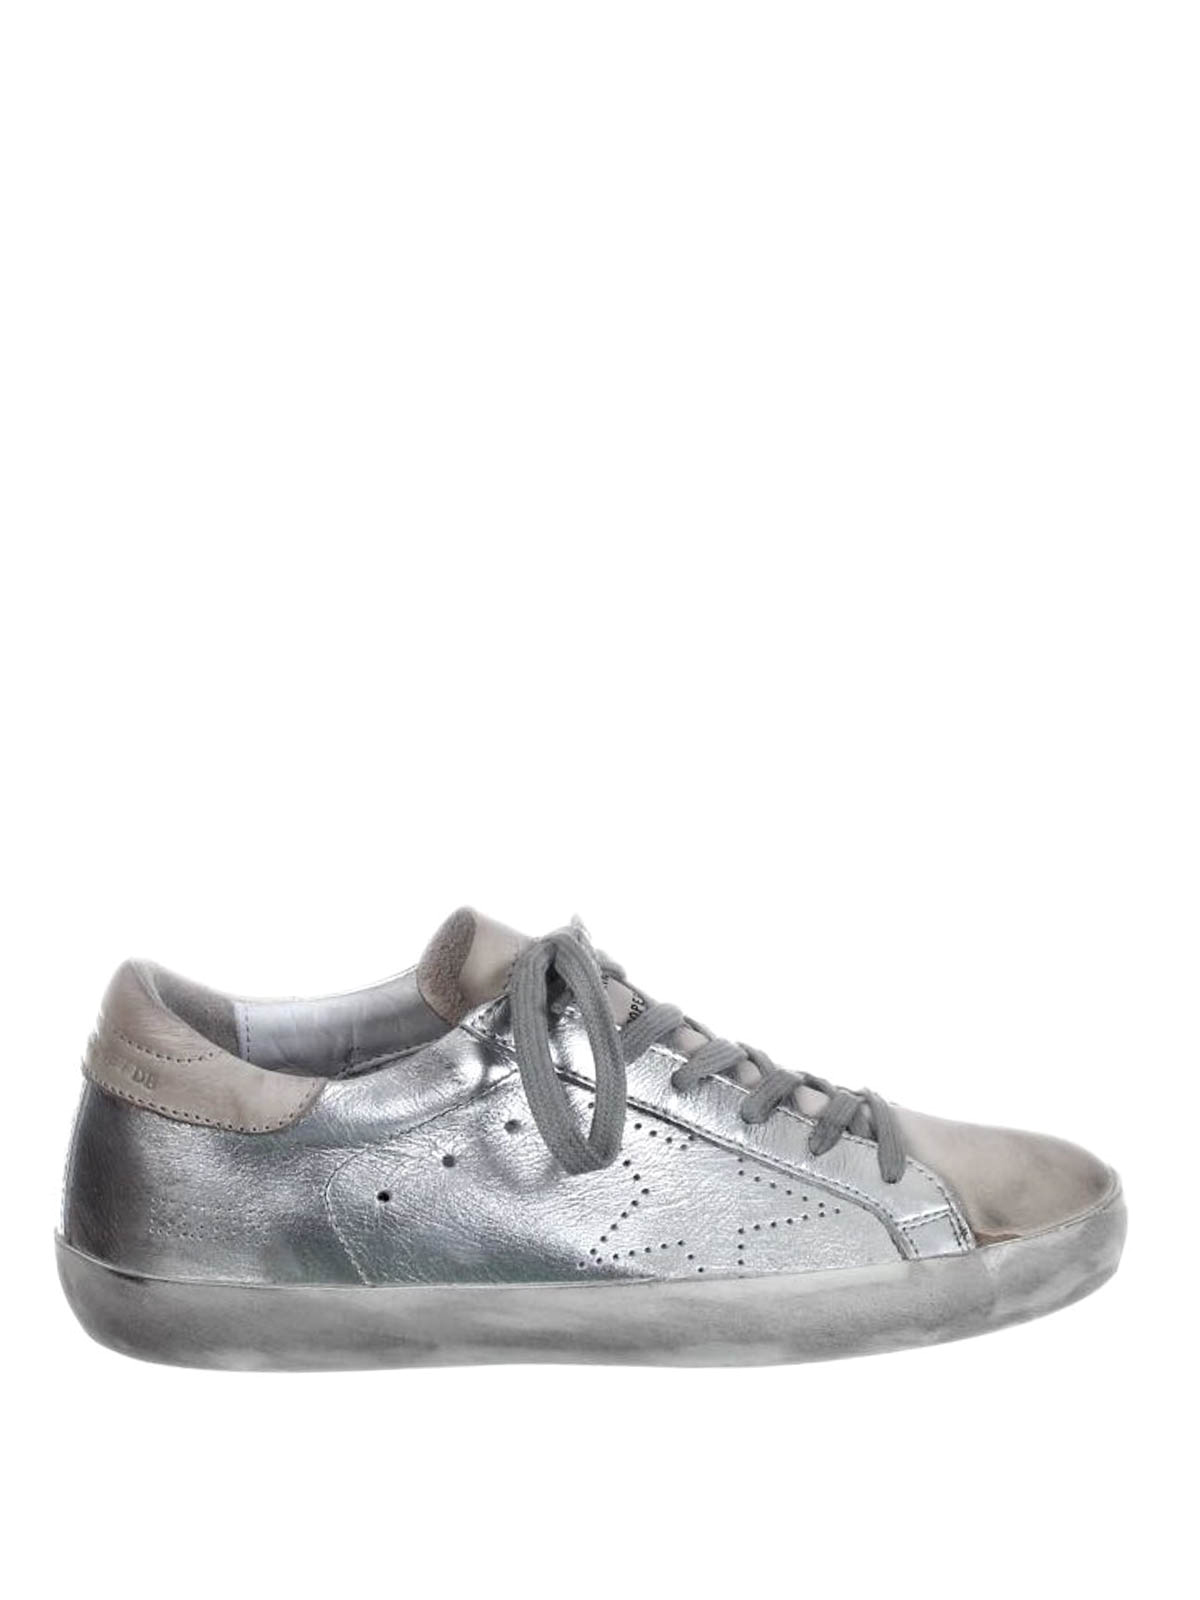 Trainers Golden - Superstar laminated silver